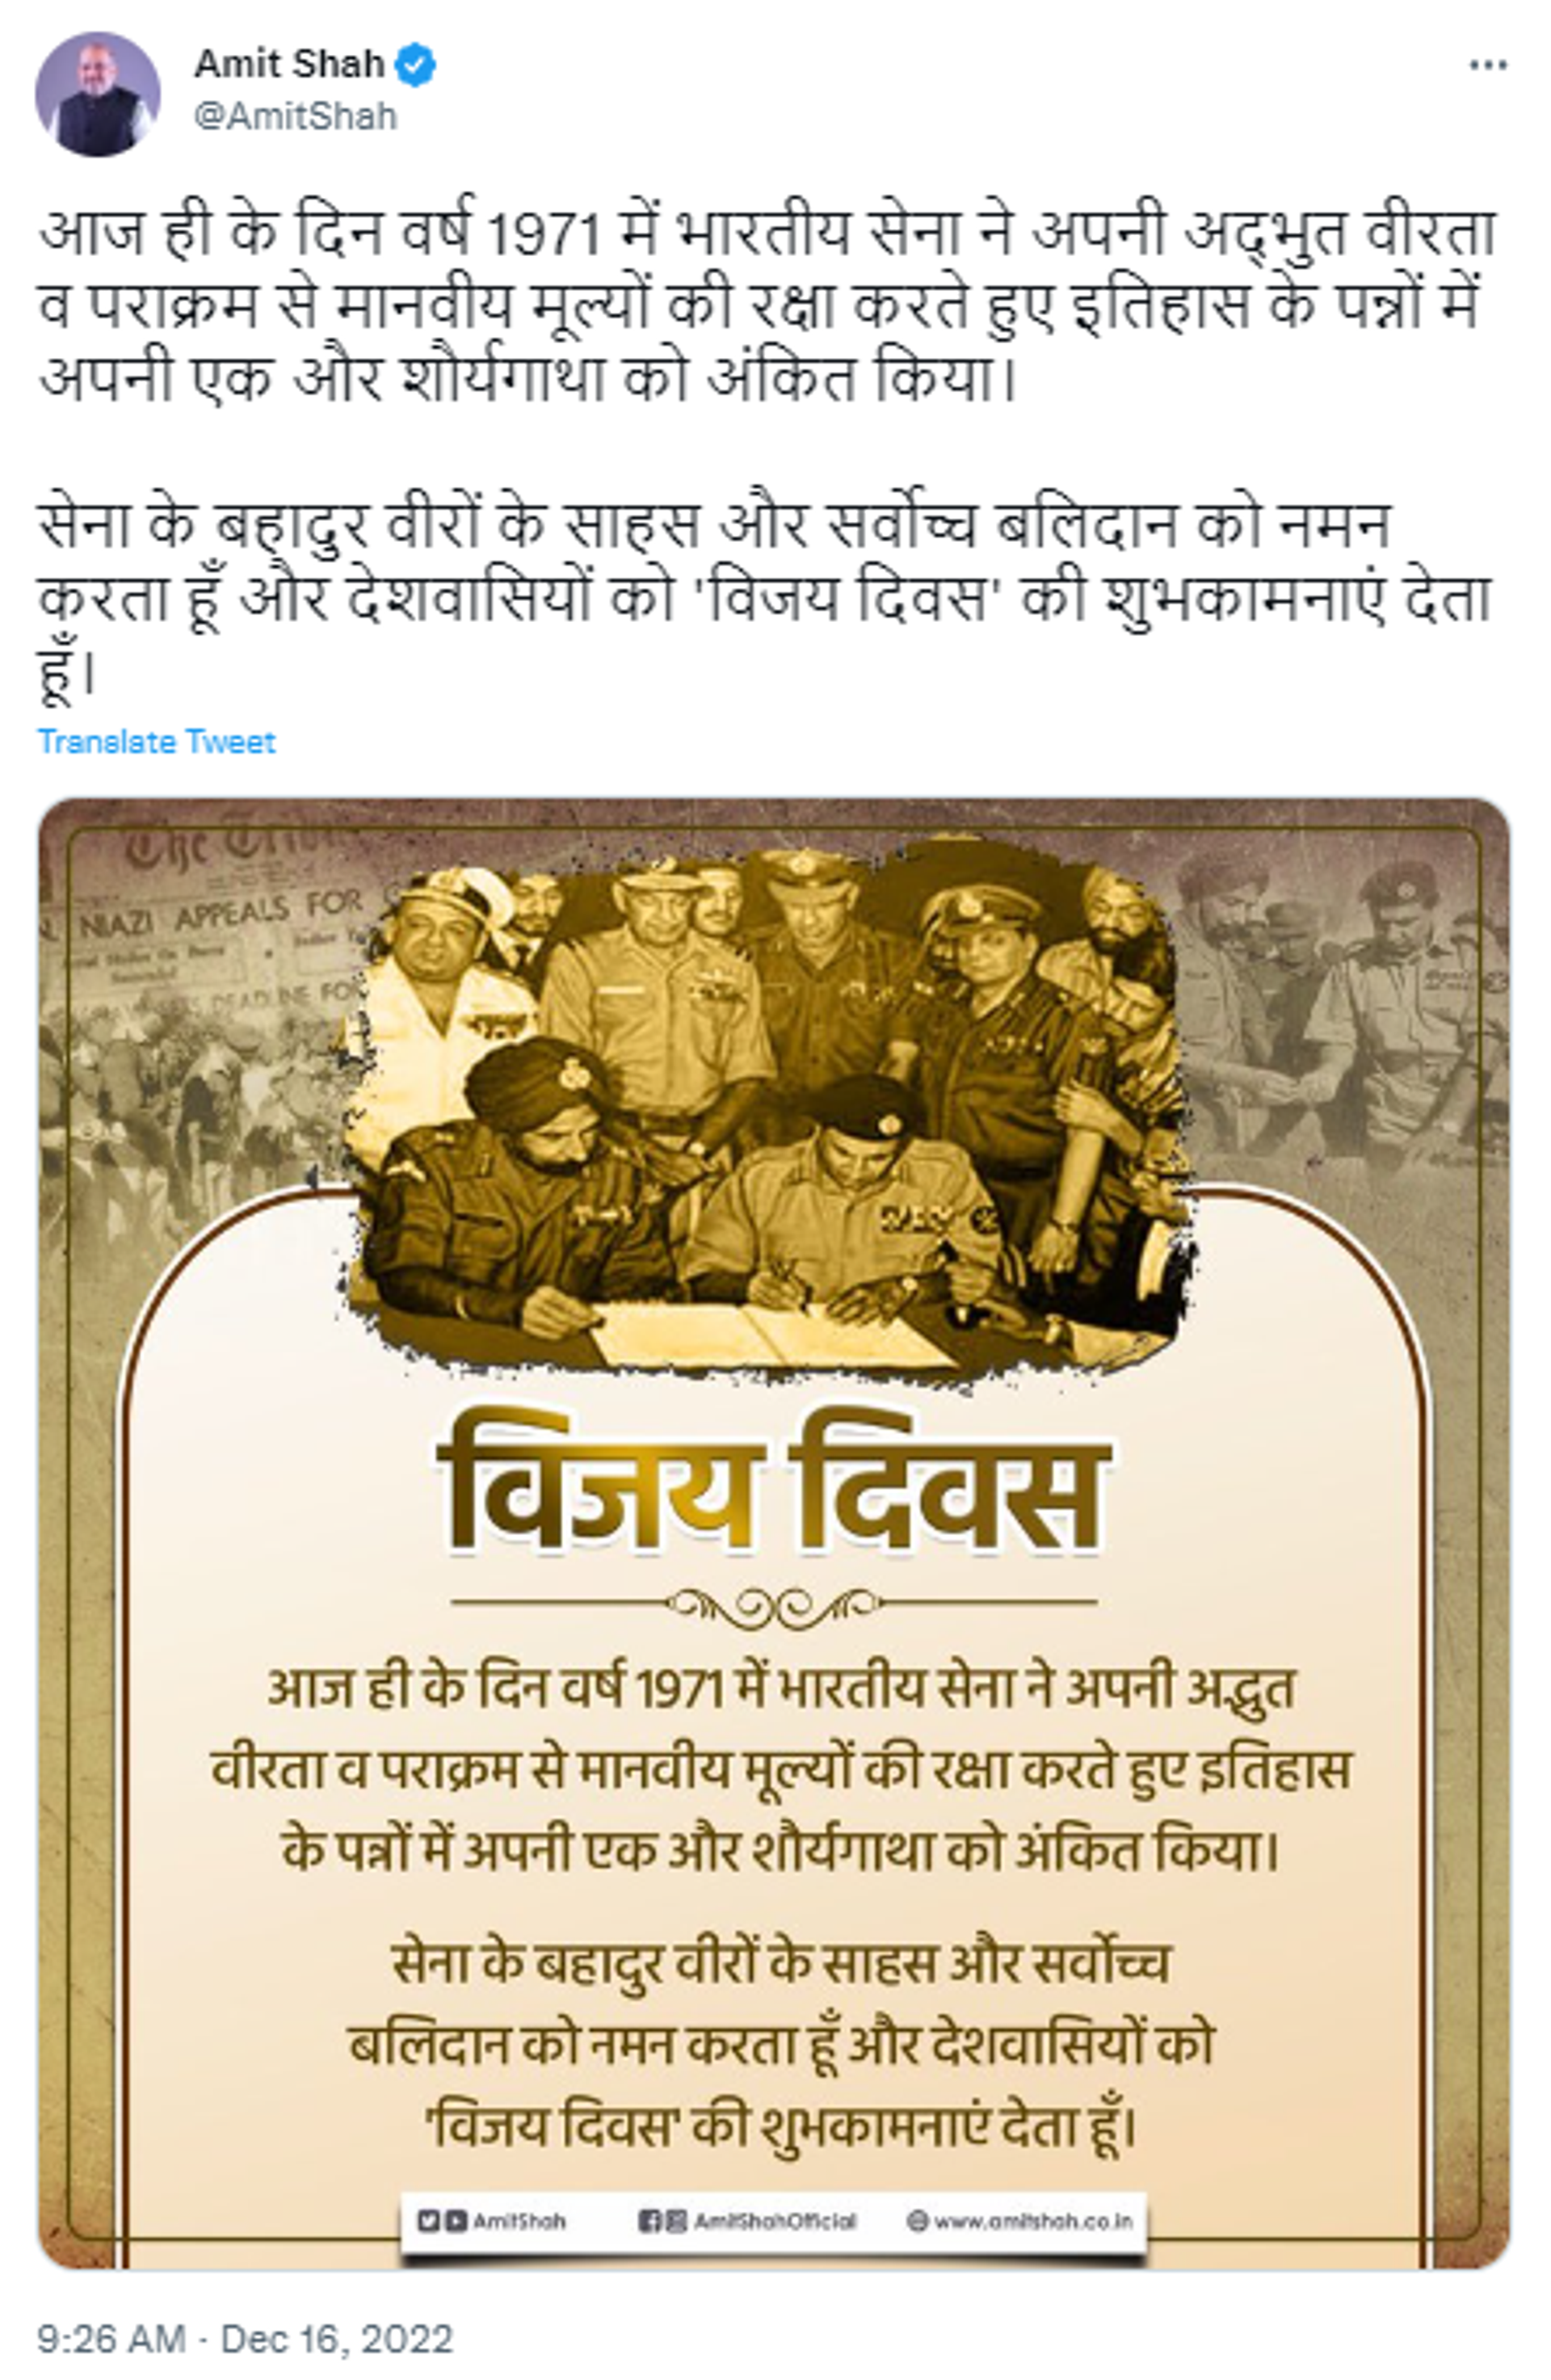 Federal Home Minister Amit Shah Pays Tribute to Soldiers on Vijay Diwas - Sputnik India, 1920, 16.12.2022